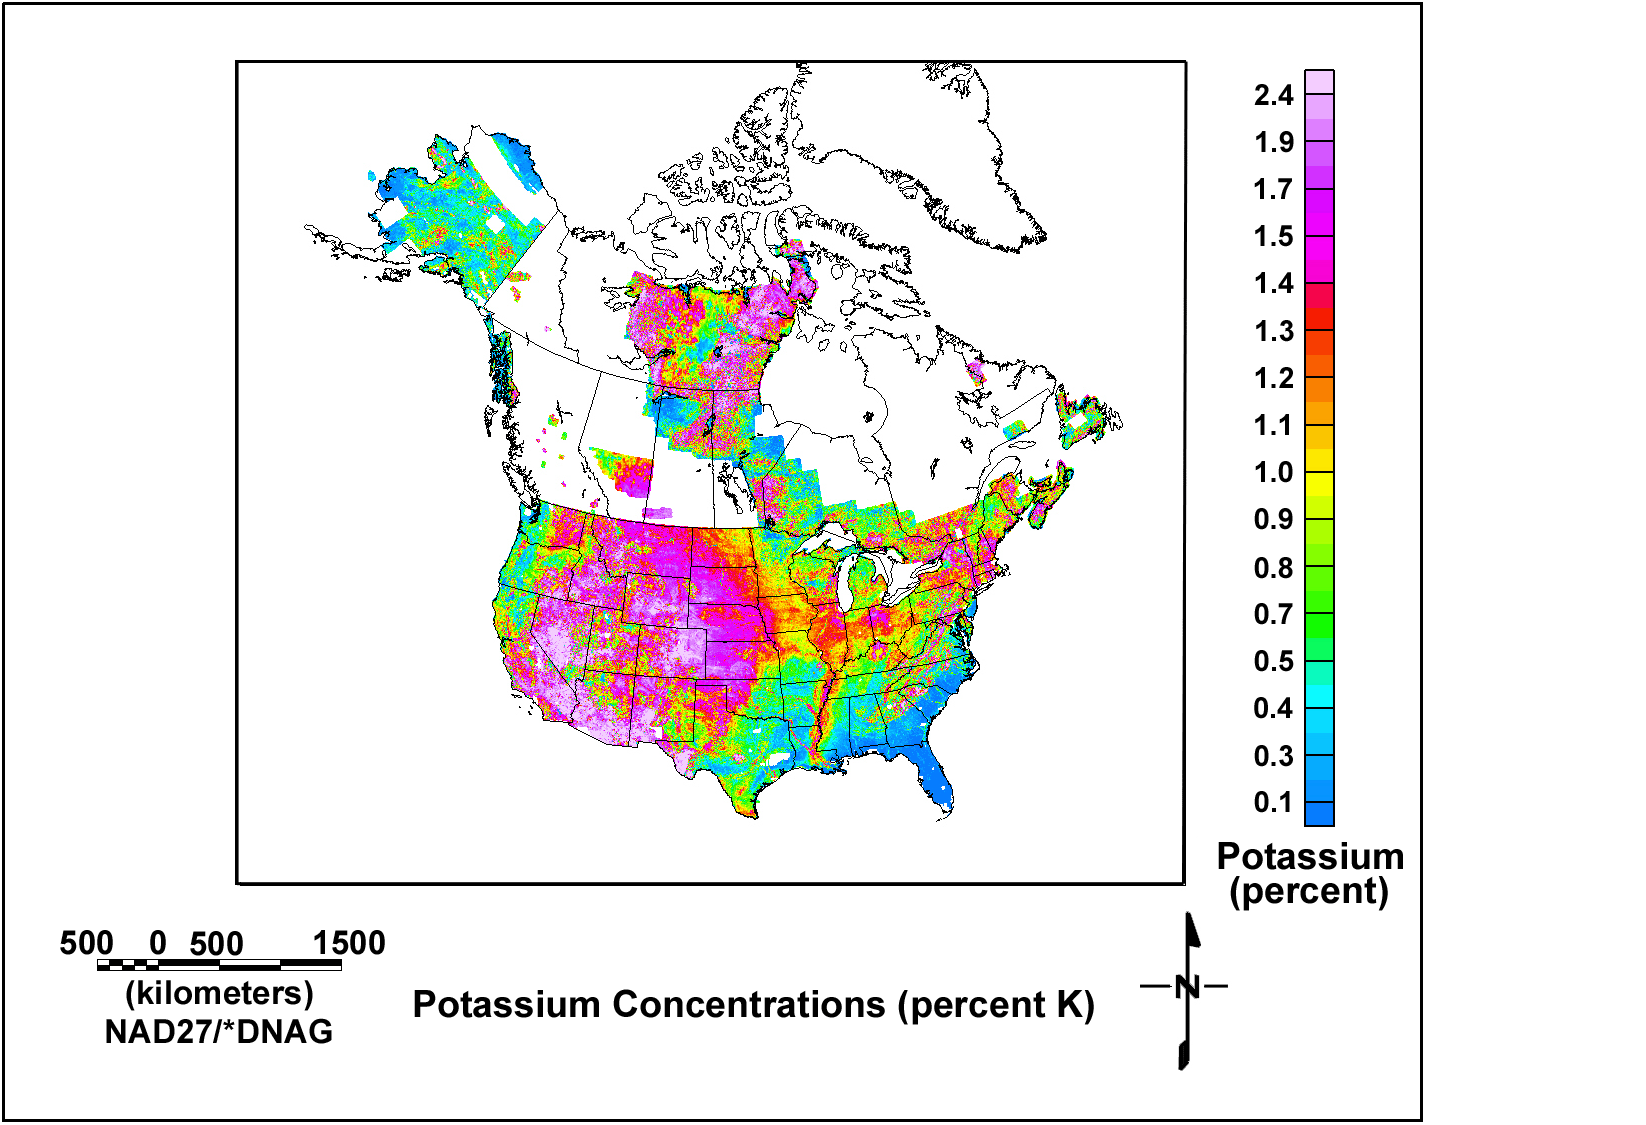 Image of map of potassium concentrations.